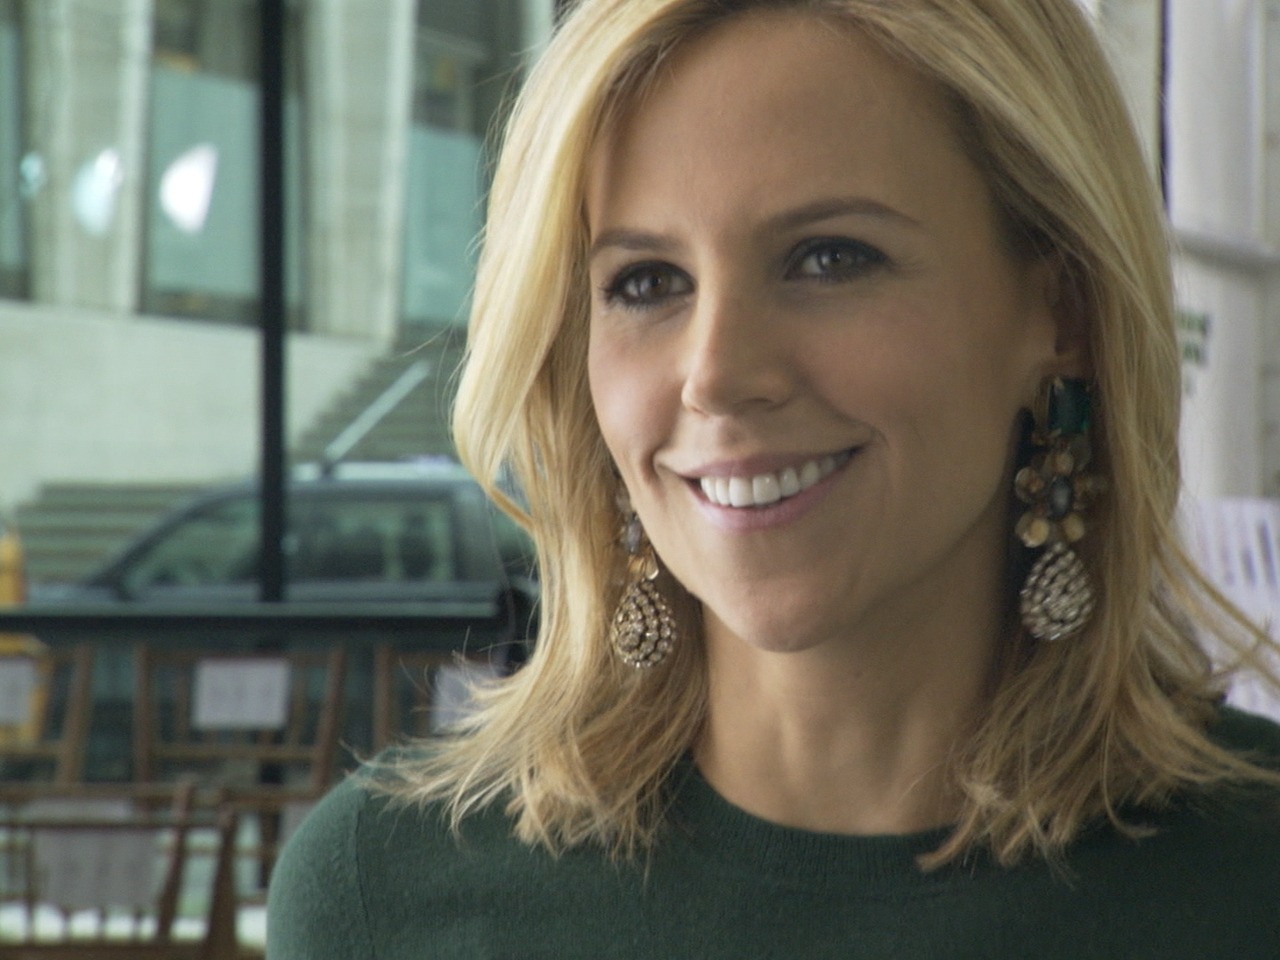 Behind the scenes of Tory Burch's fashion empire